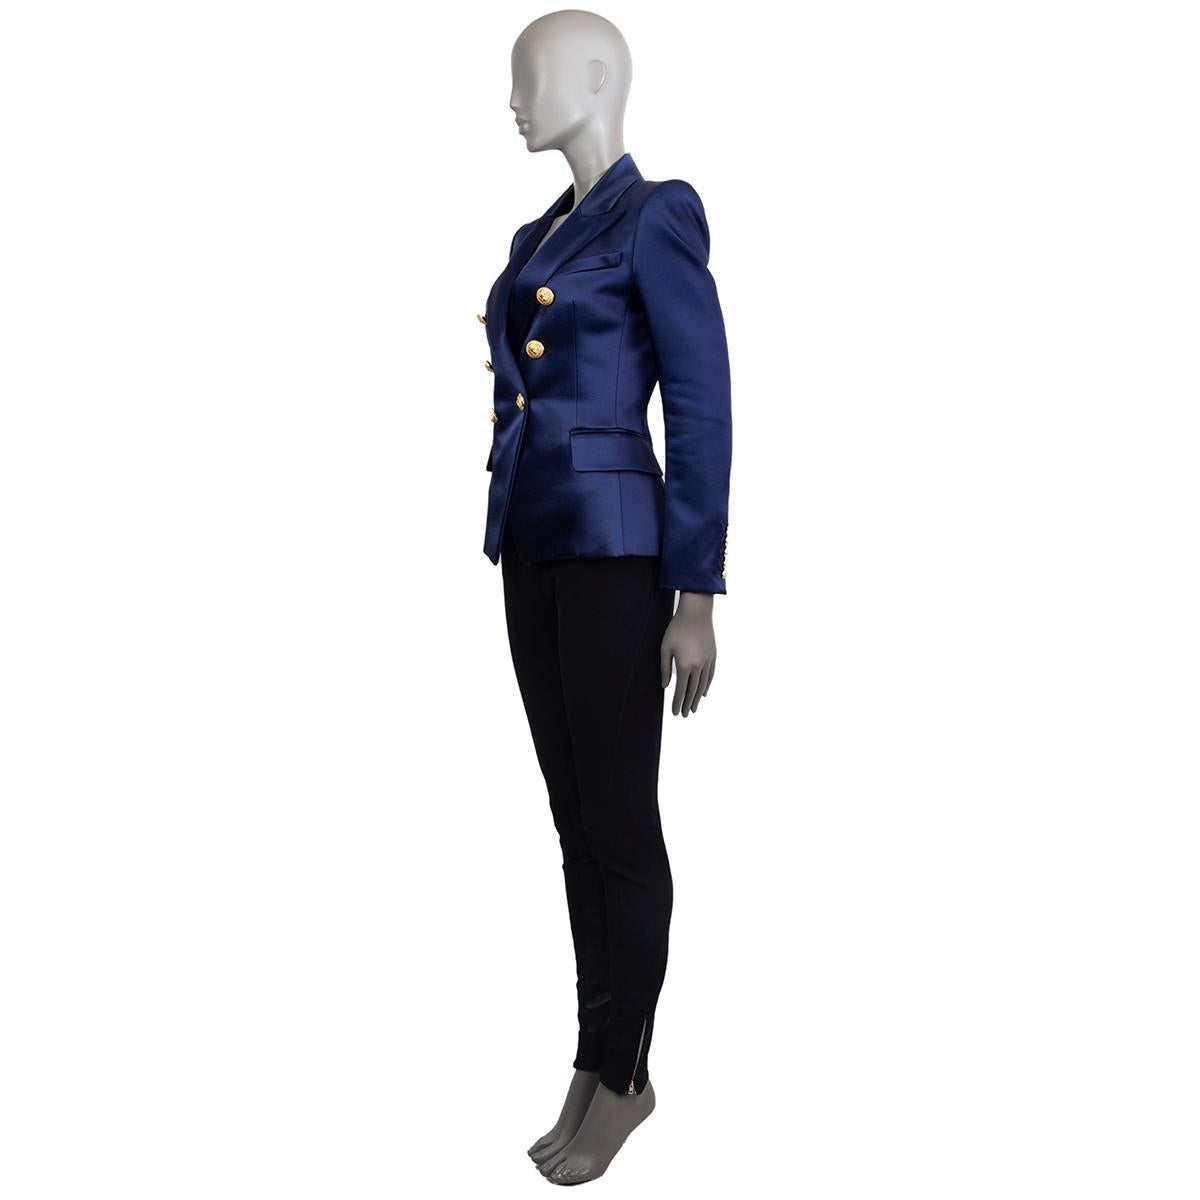 Balmain signature double-breasted satin blazer in navy acetate (52%) cotton (48%) with a slim-fitting silhouette, one patch pocket on the chest, two flap pockets and buttoned cuffs at the back. Closes with embosses gold-tone buttons in the front.